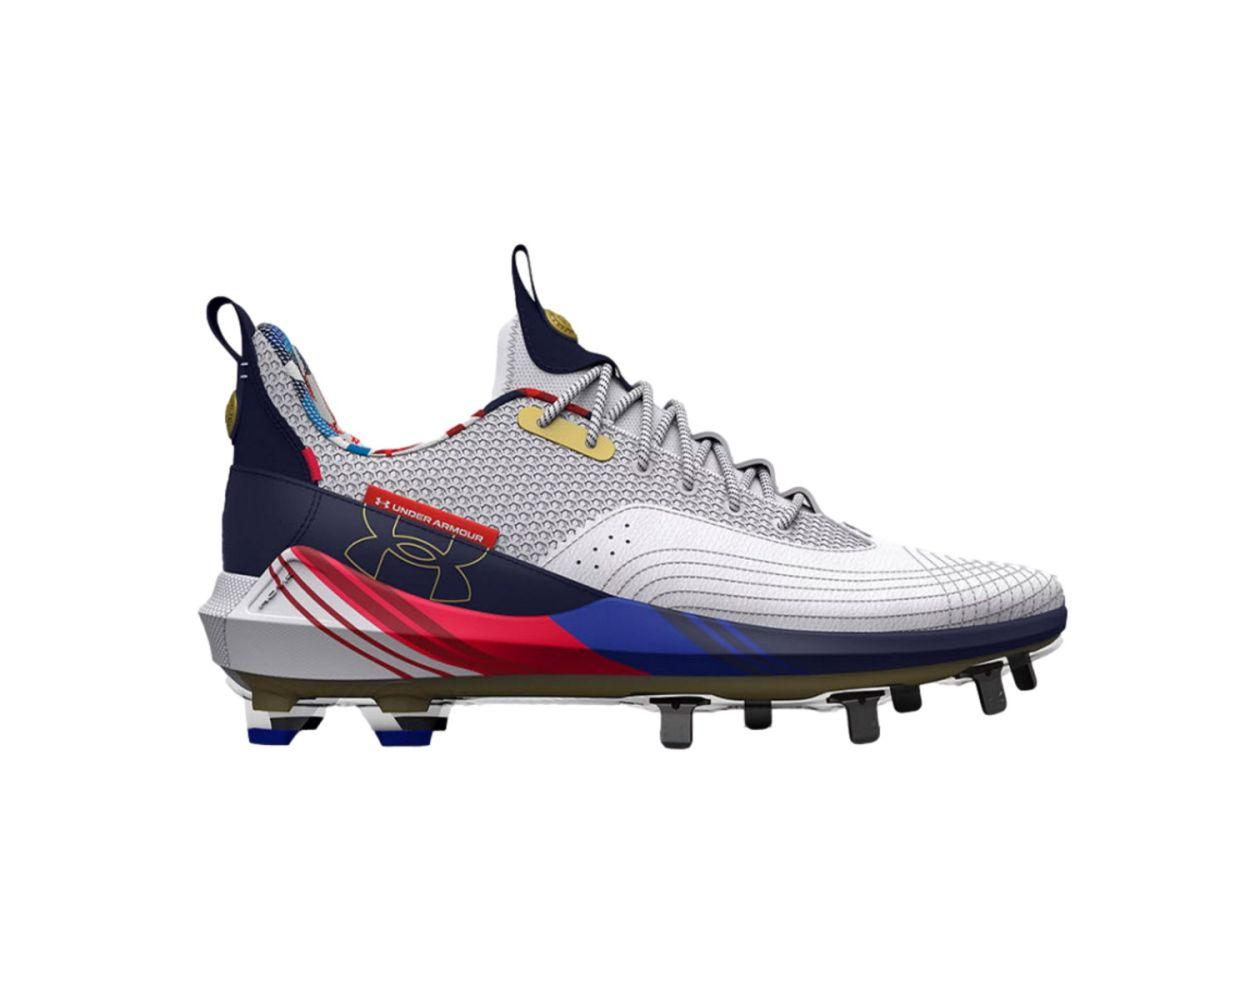 Under Armour Bryce Harper 6 Low ST Mens Baseball Cleats